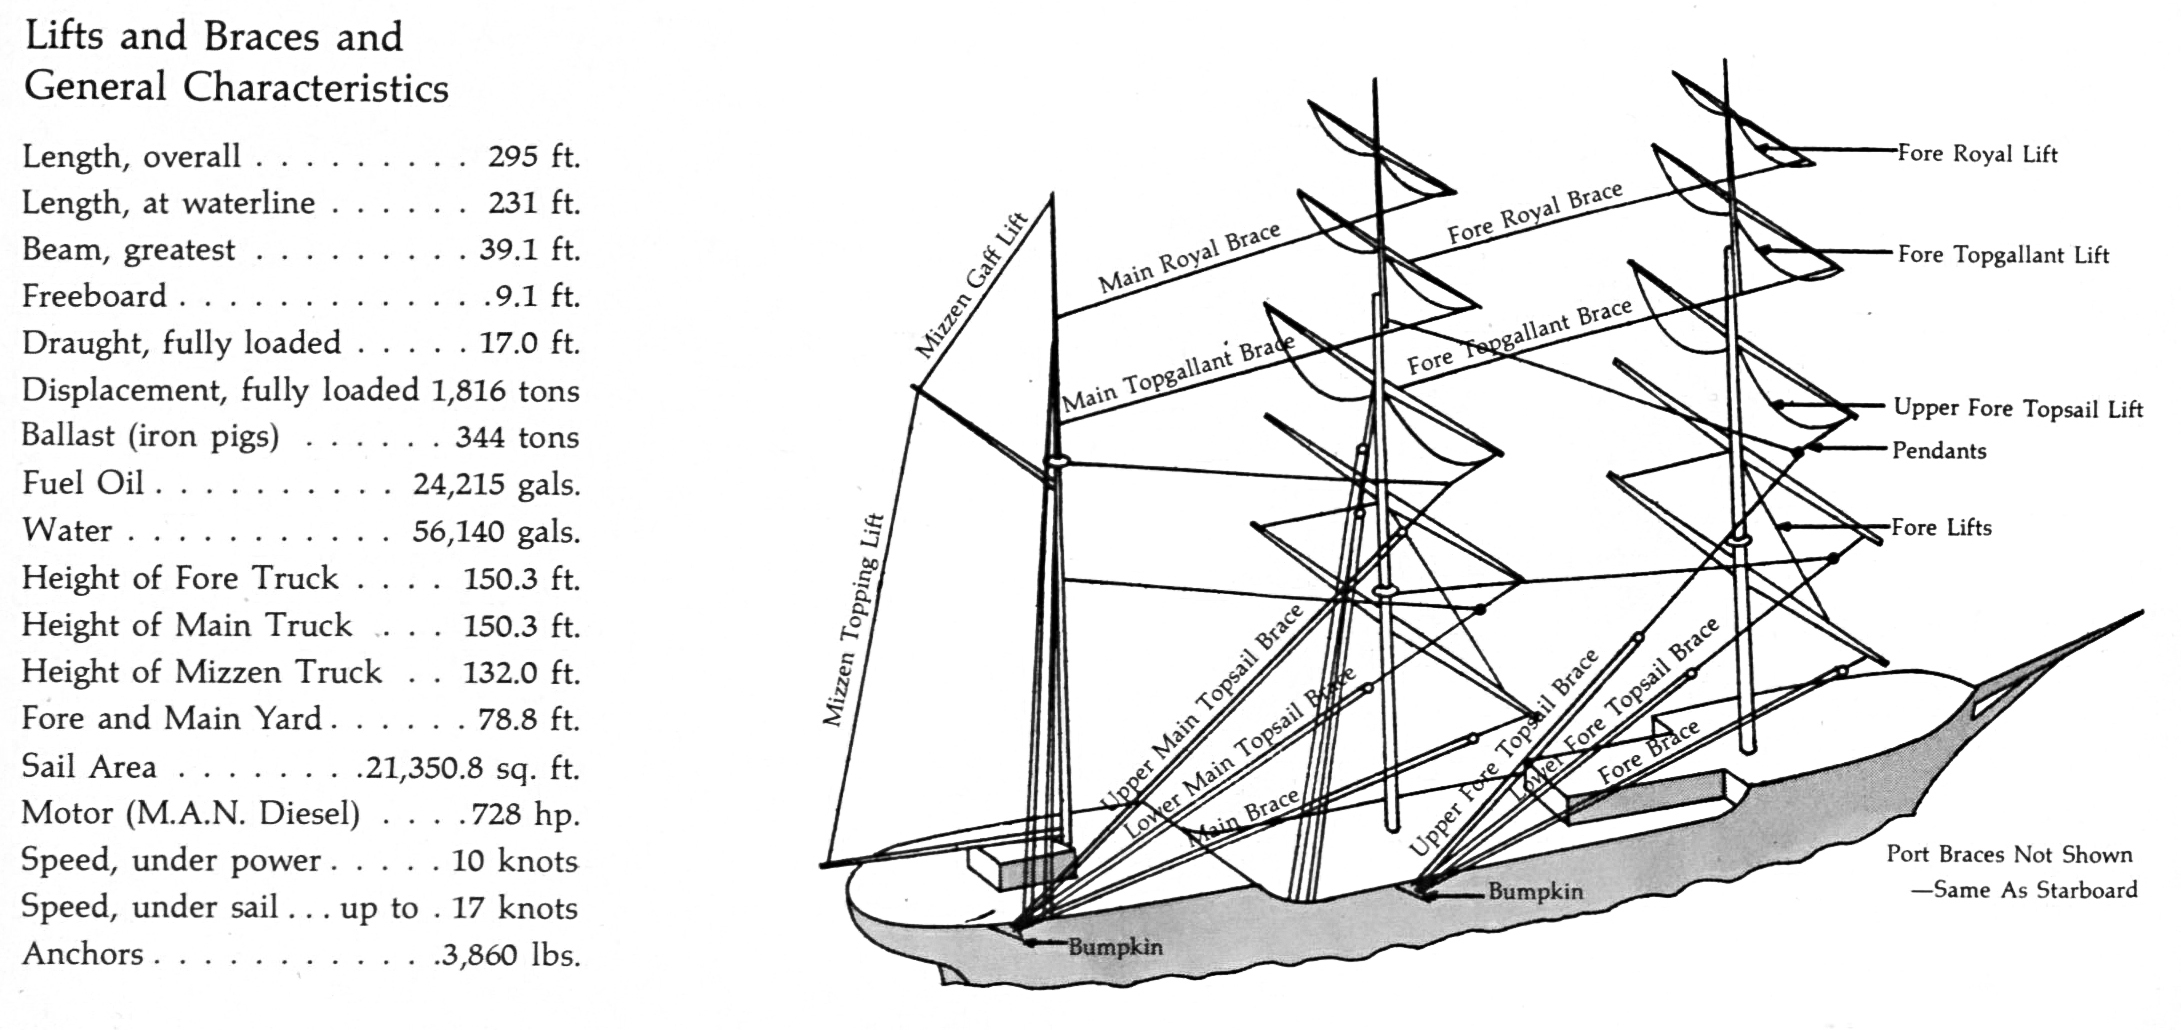 Diagram of USCGC Eagle Lifts and Braces and General Characteristics